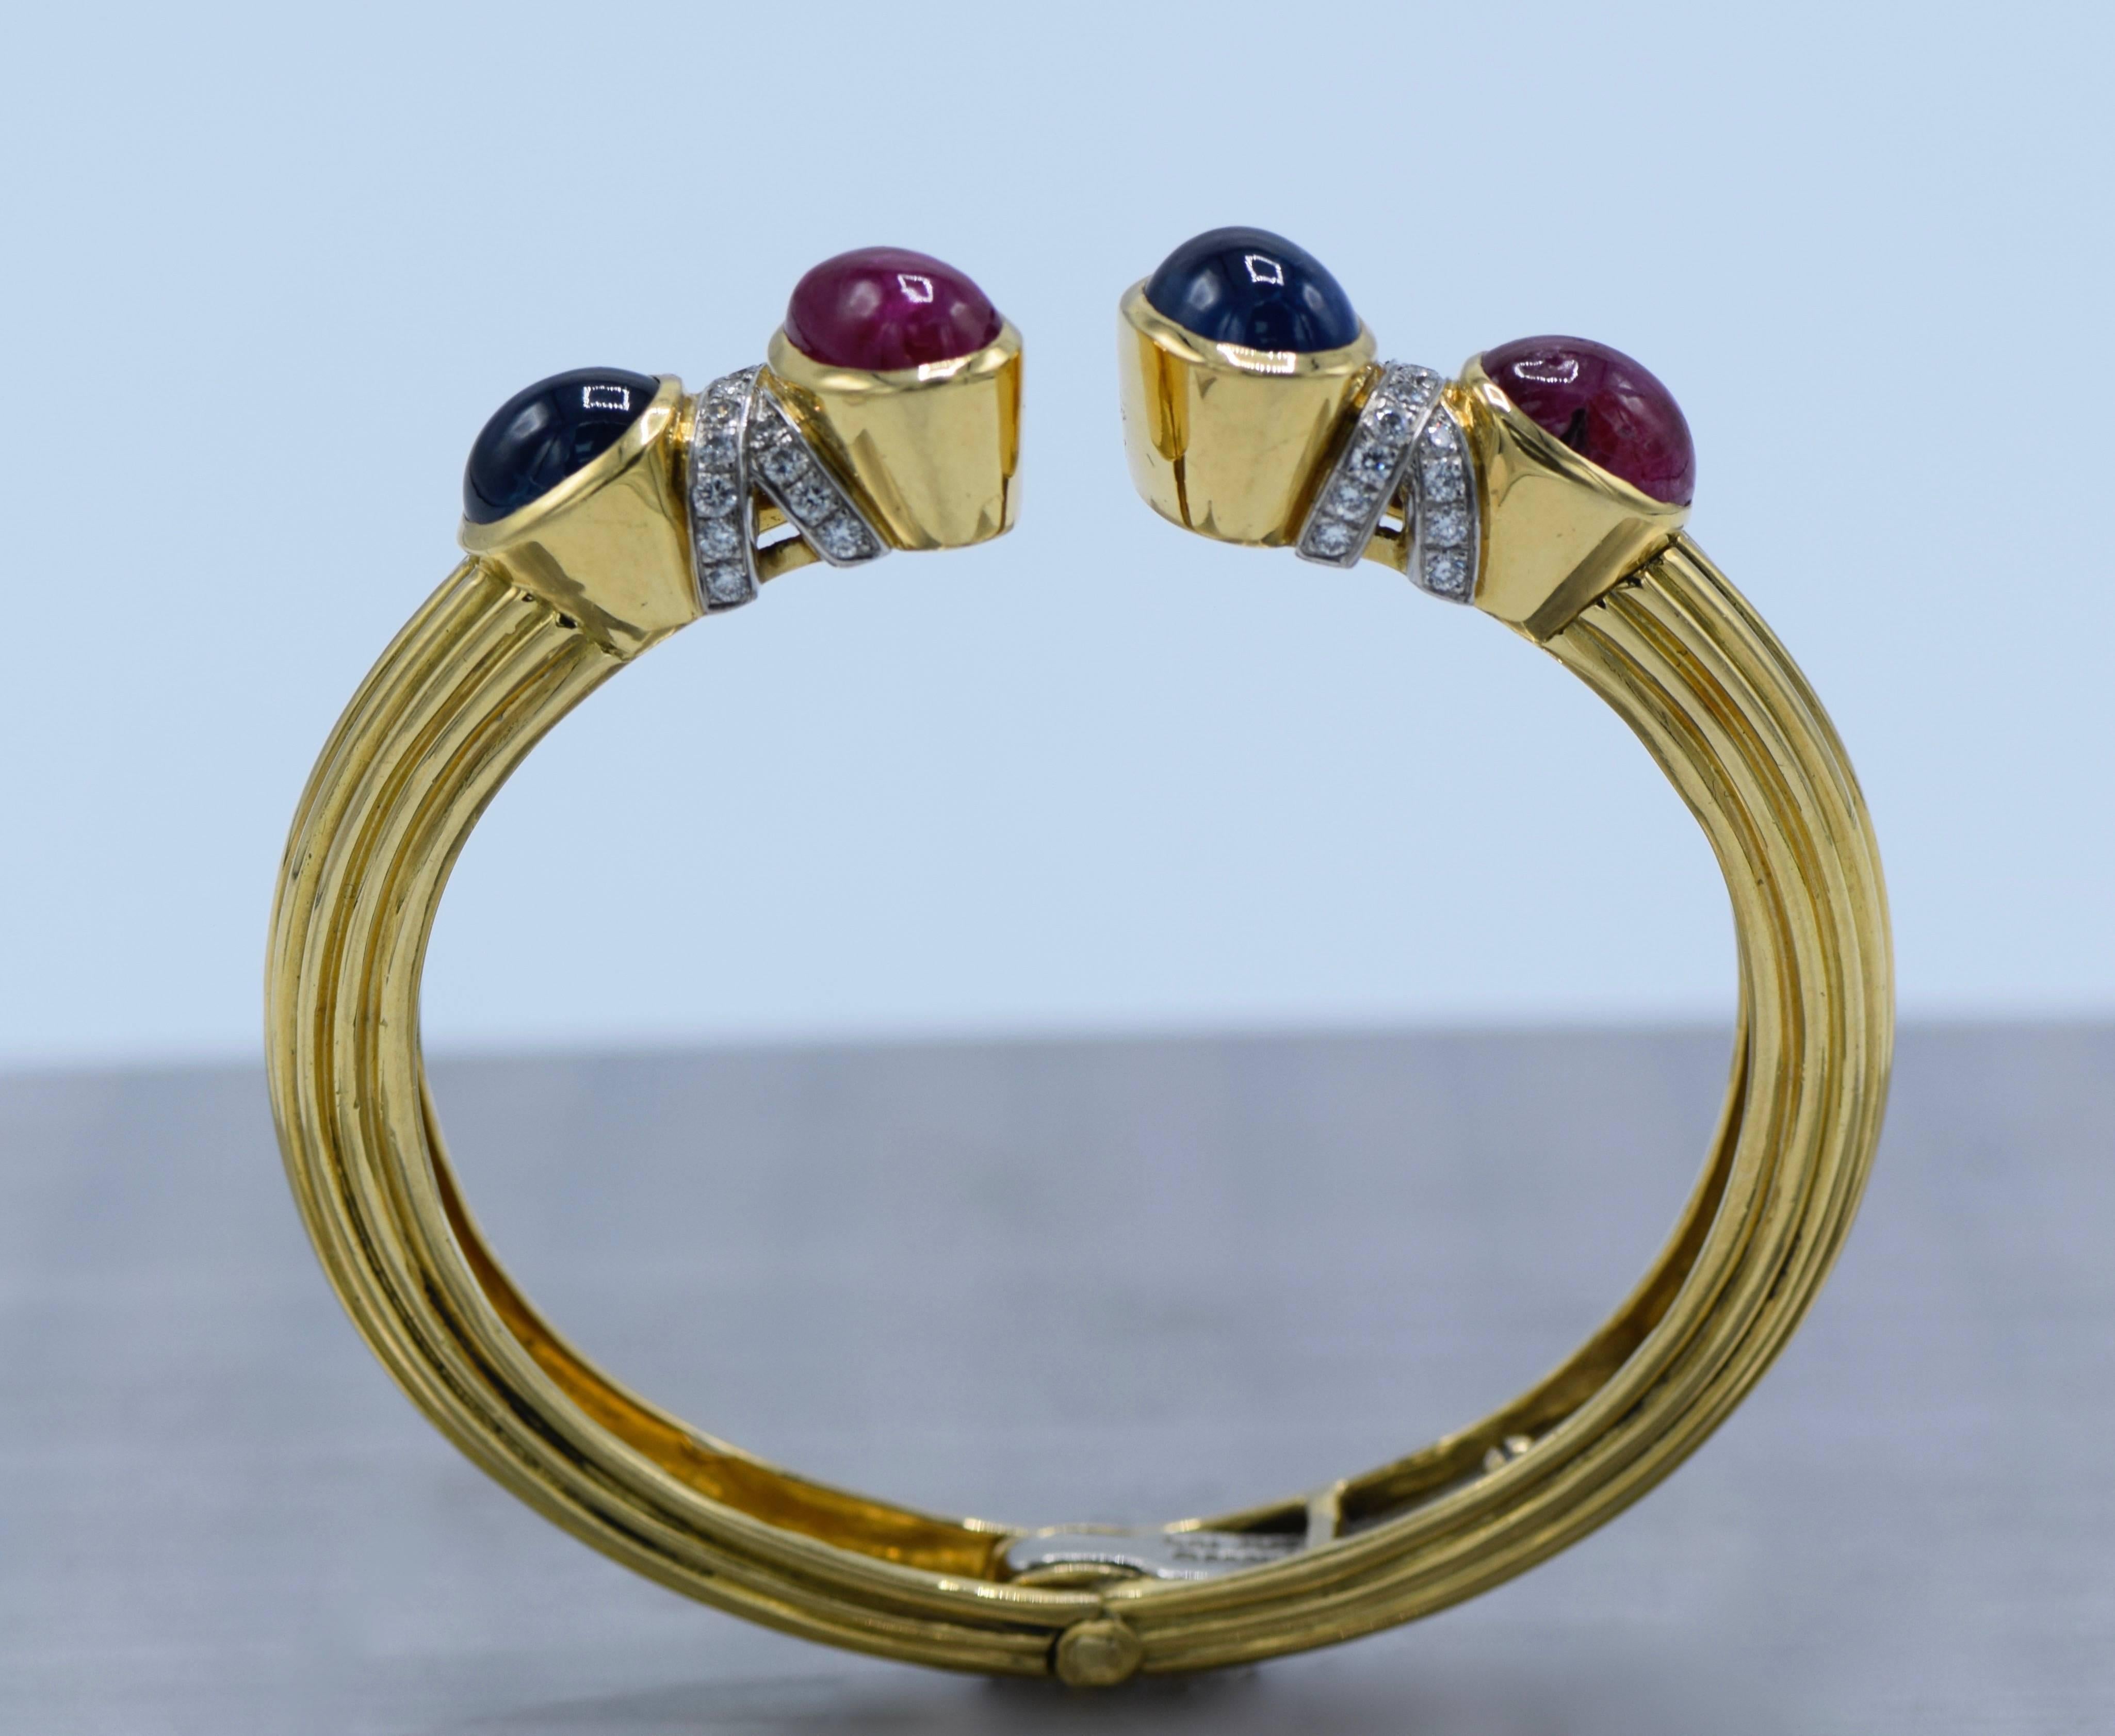 18 kt., 4 oval cabochon rubies & sapphires, 38 round diamonds ap. 1.00 ct., signed Webb, ap. 31.6 dwts. Inner cir. 6 3/16 inches. 

Cabochon rubies: deep pinkish-red, included, visible to eye, several surface-reaching inclusions & cavity, good